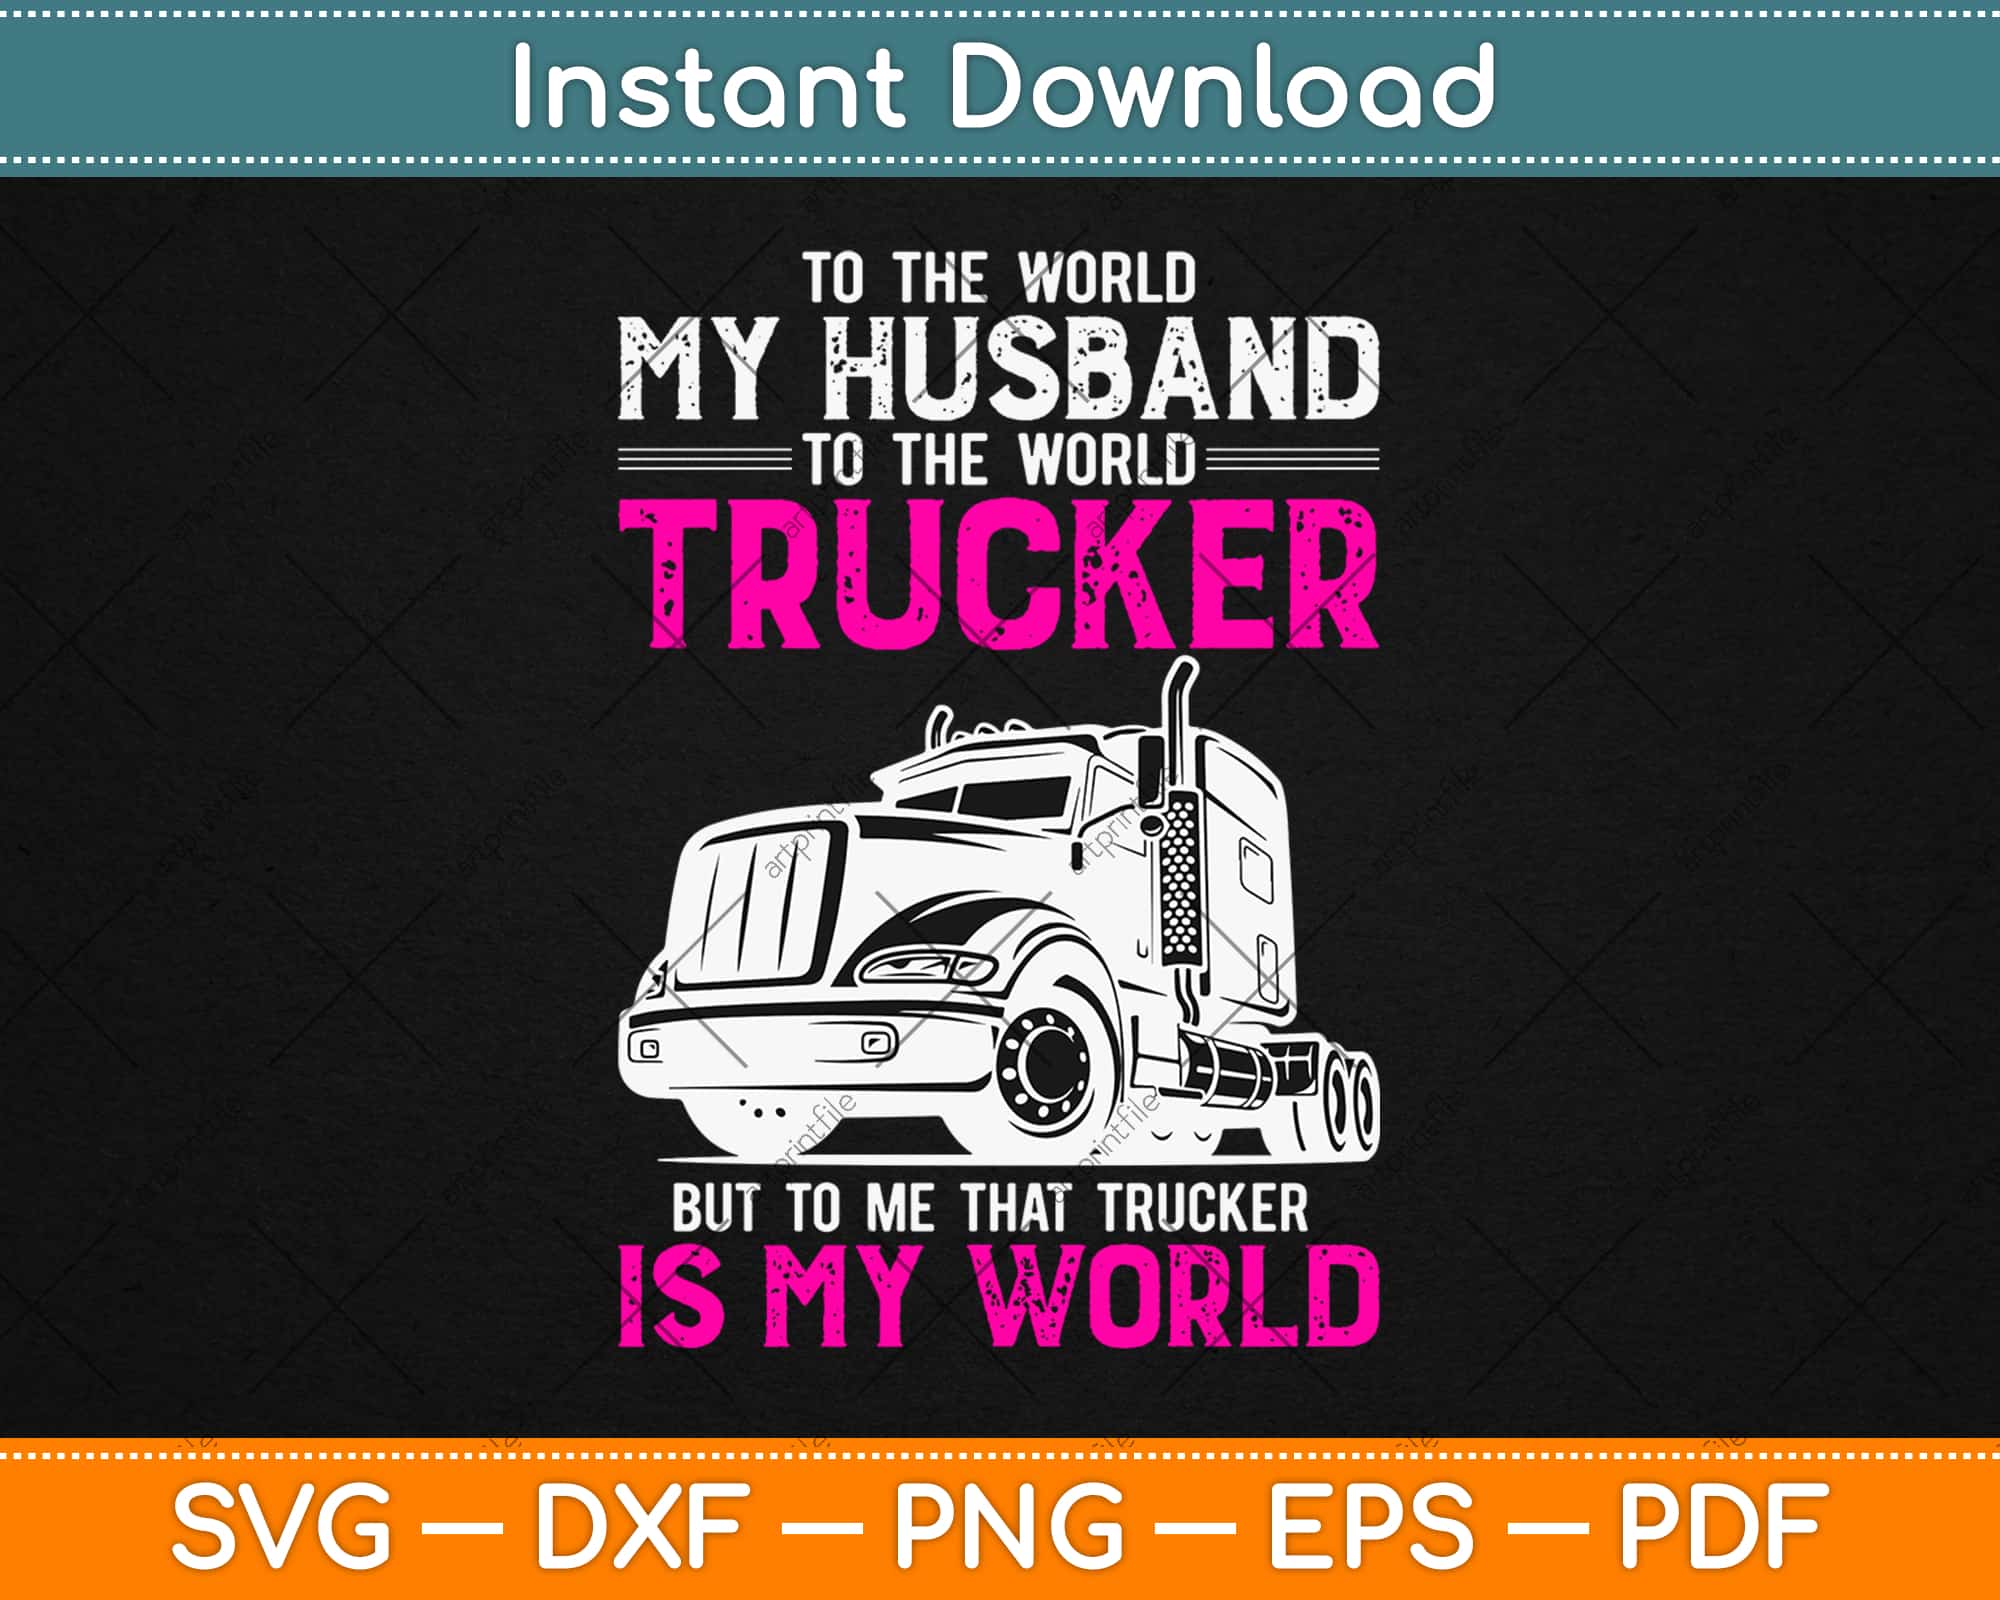 Download Truckers Wife Svg File Truck Driver Svg File Semi Truck Svg File Vector Art For Commercial Personal Use Cricut Cameo Silhouette Vinyl Die Cuts Papercraft Kromasol Com